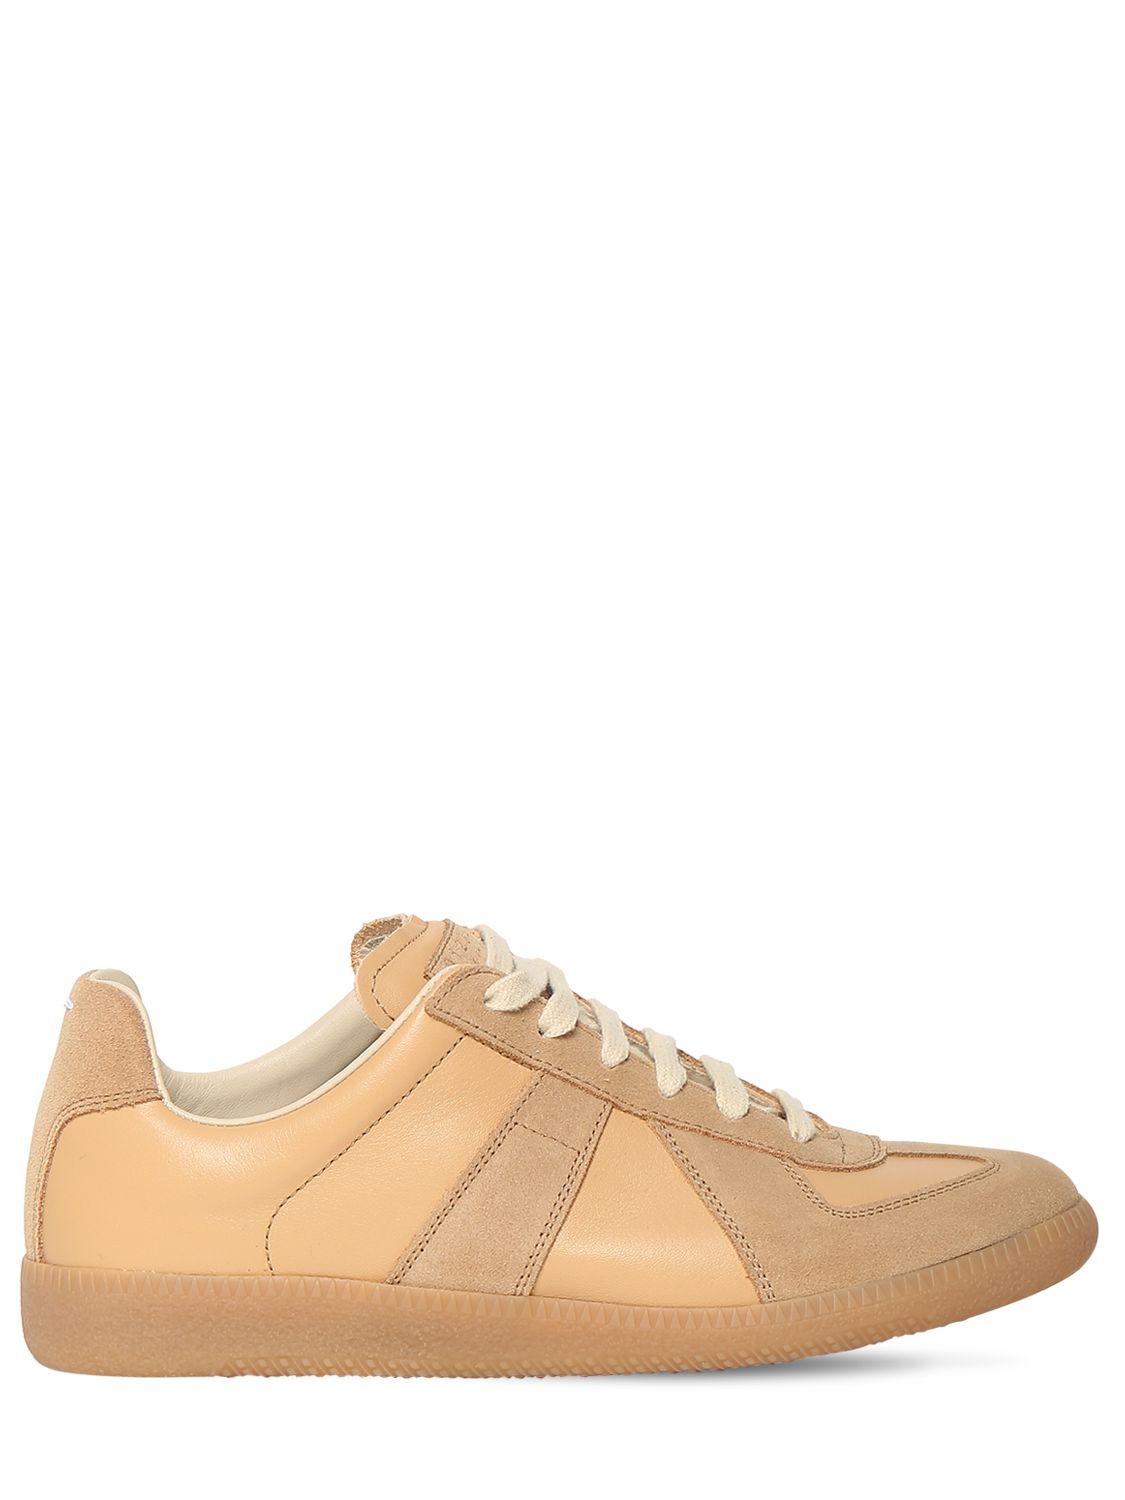 Maison Margiela Replica Mixed Leather Low-top Sneakers In Camel